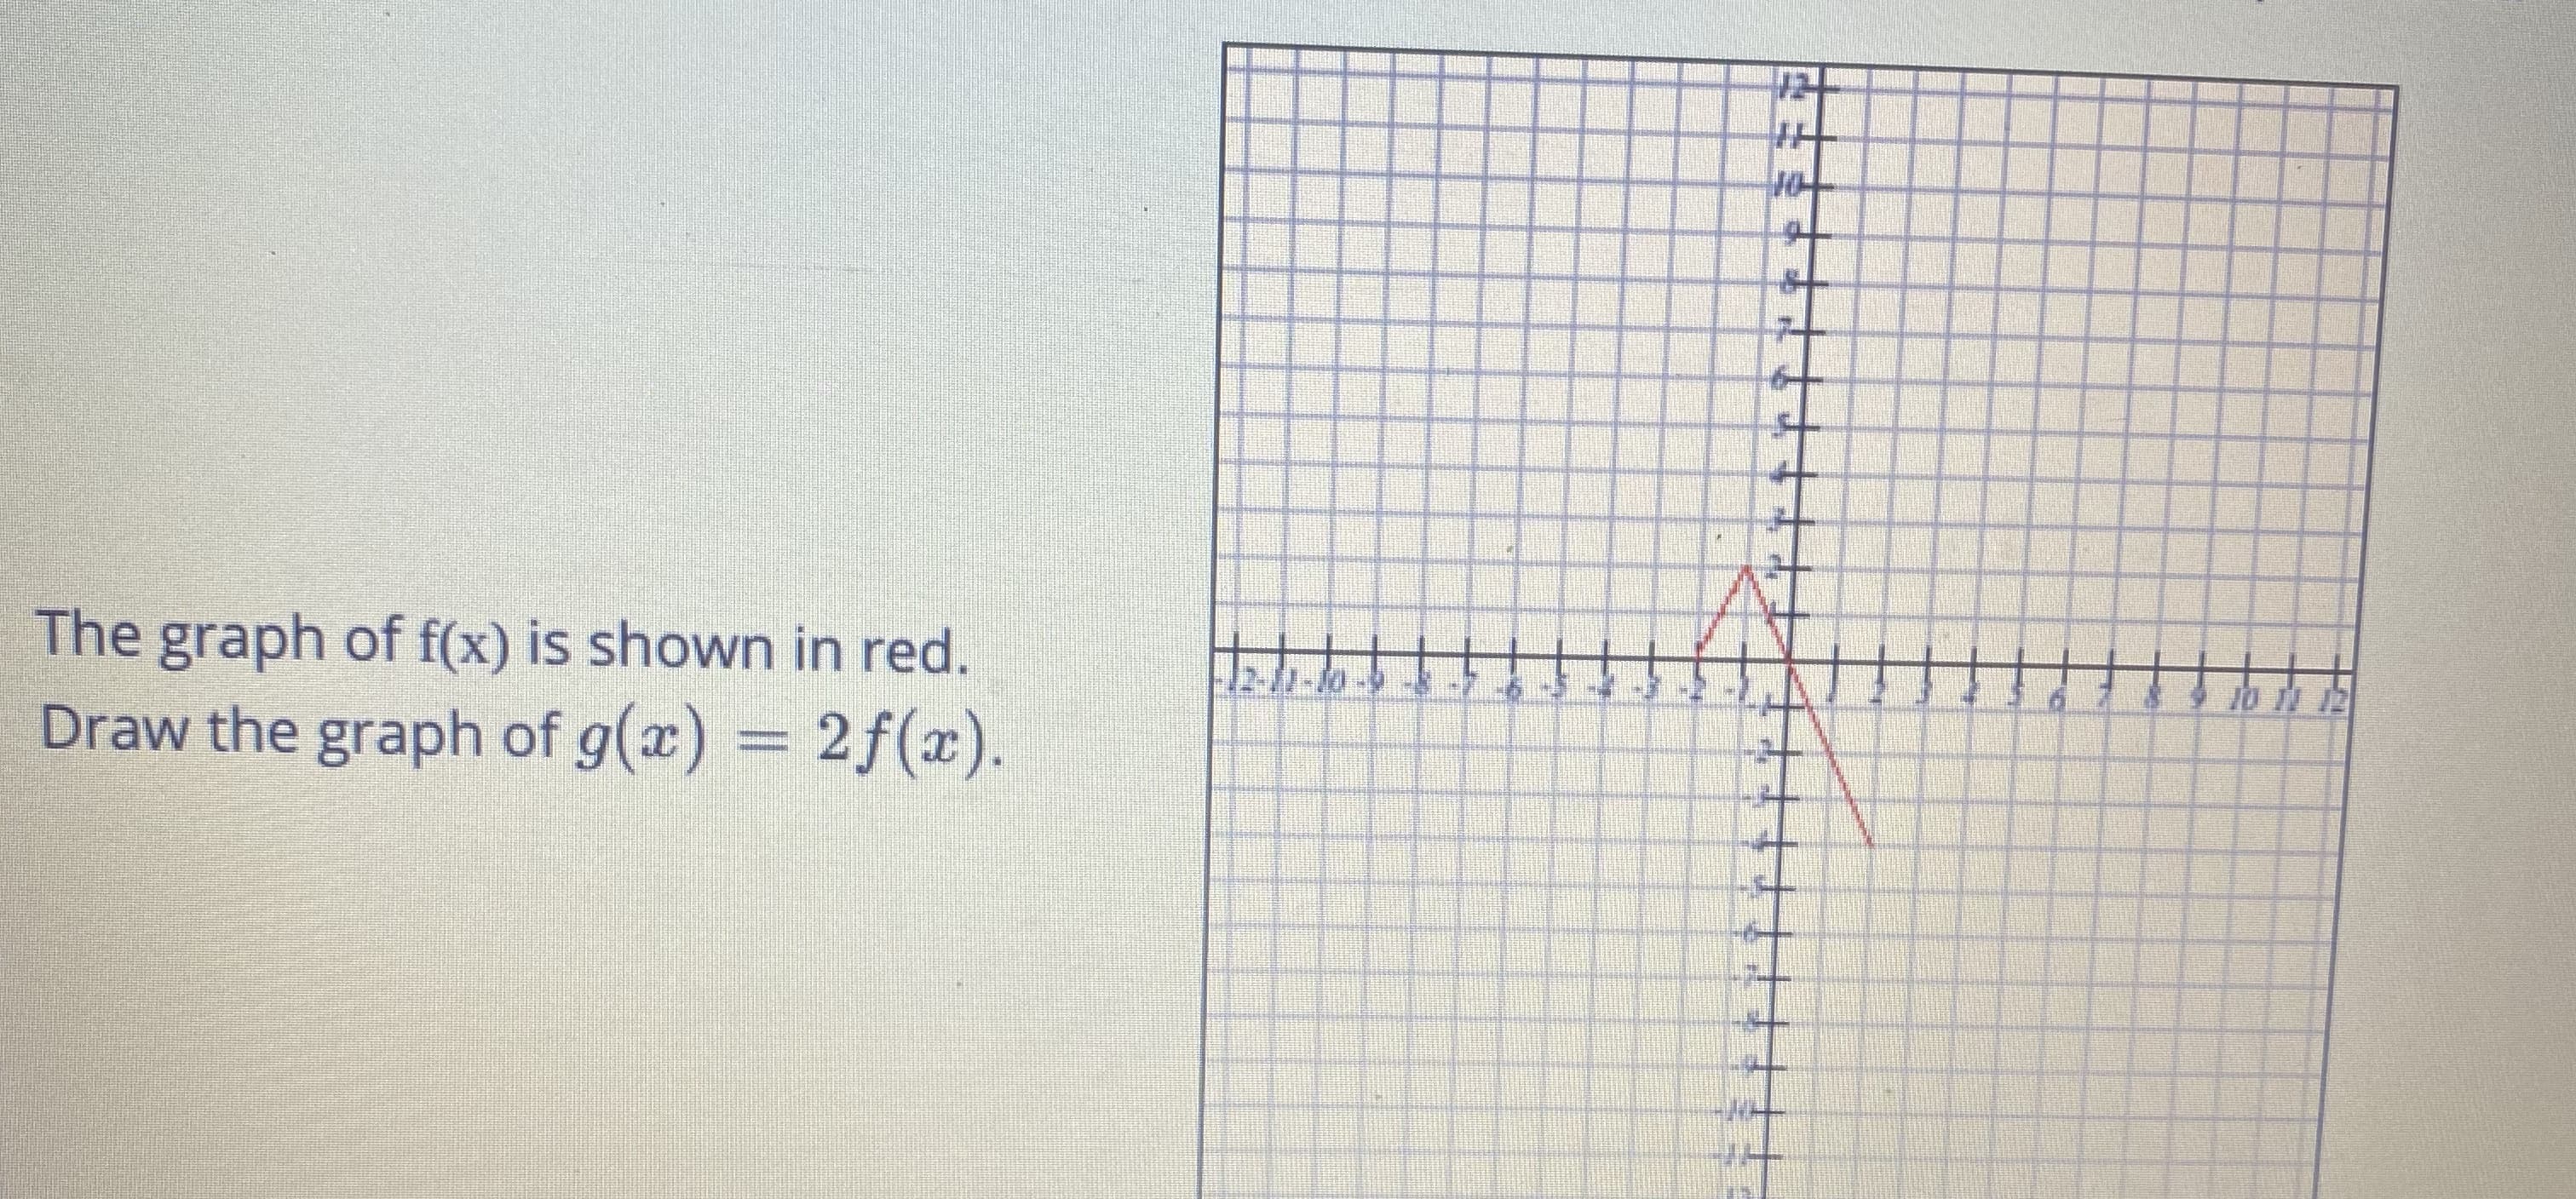 The graph of f(x) is shown in red.
Draw the graph of g(x) = 2f(x).
12-11-10-5
%3D
